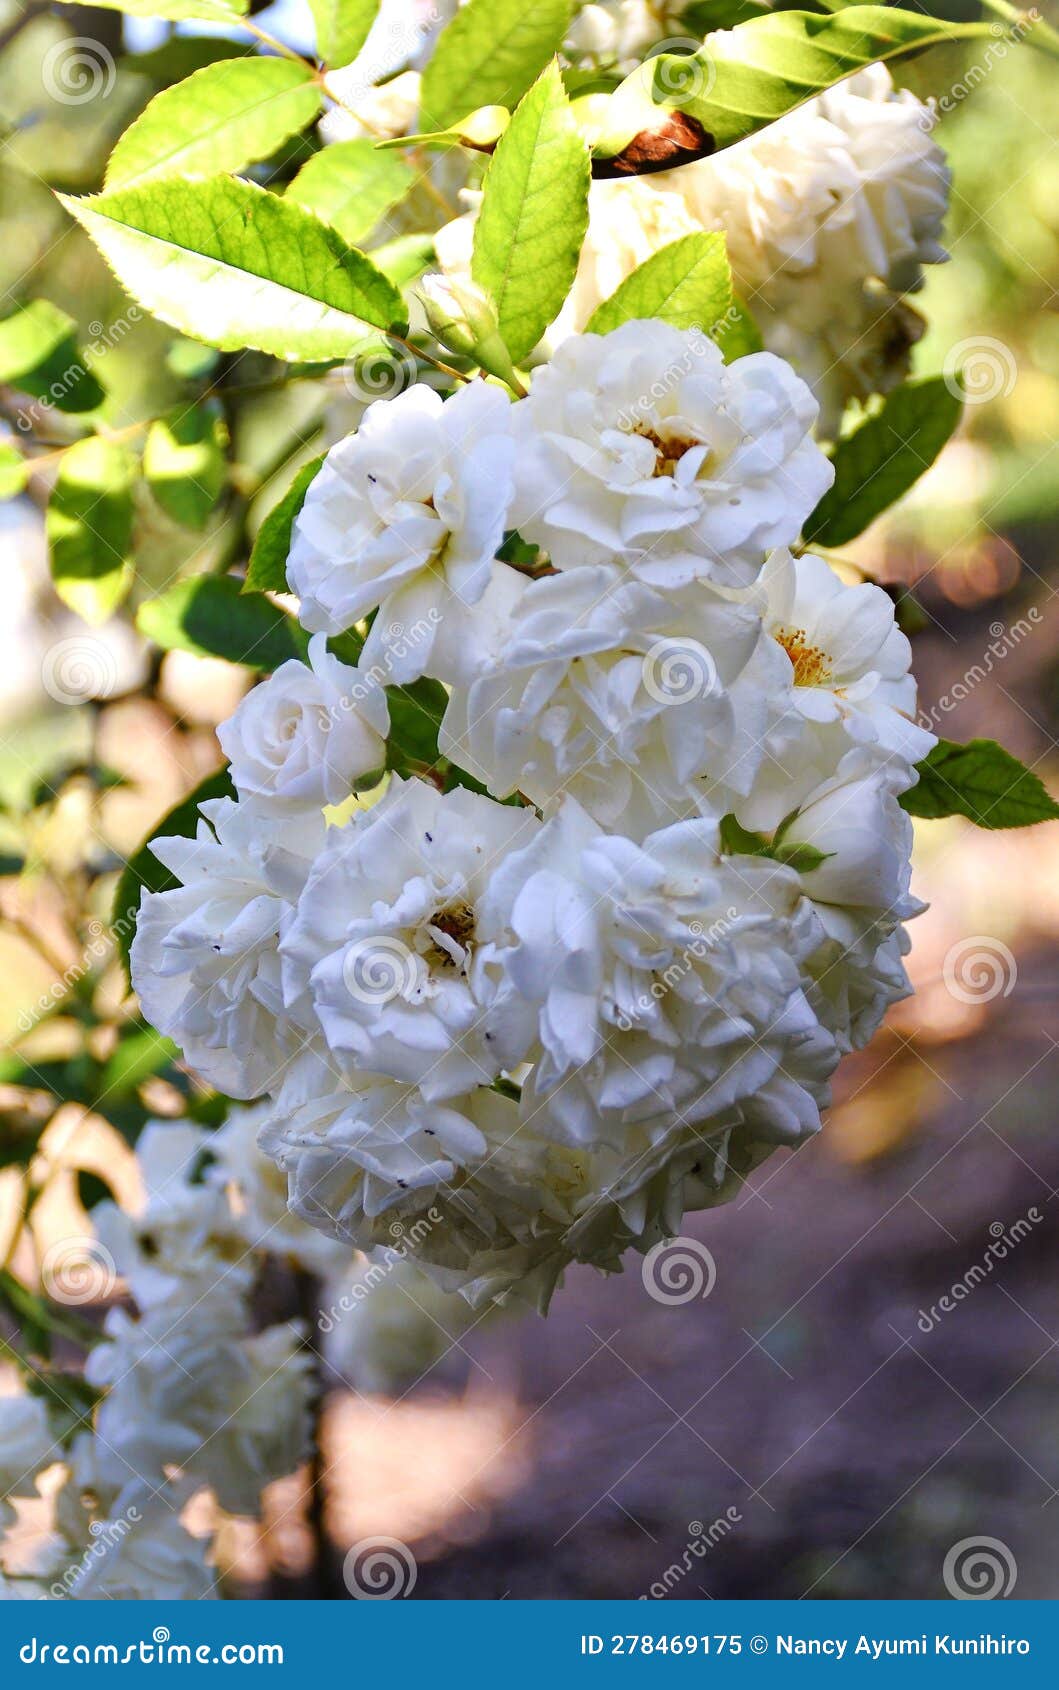 beautiful branch filled with white roses